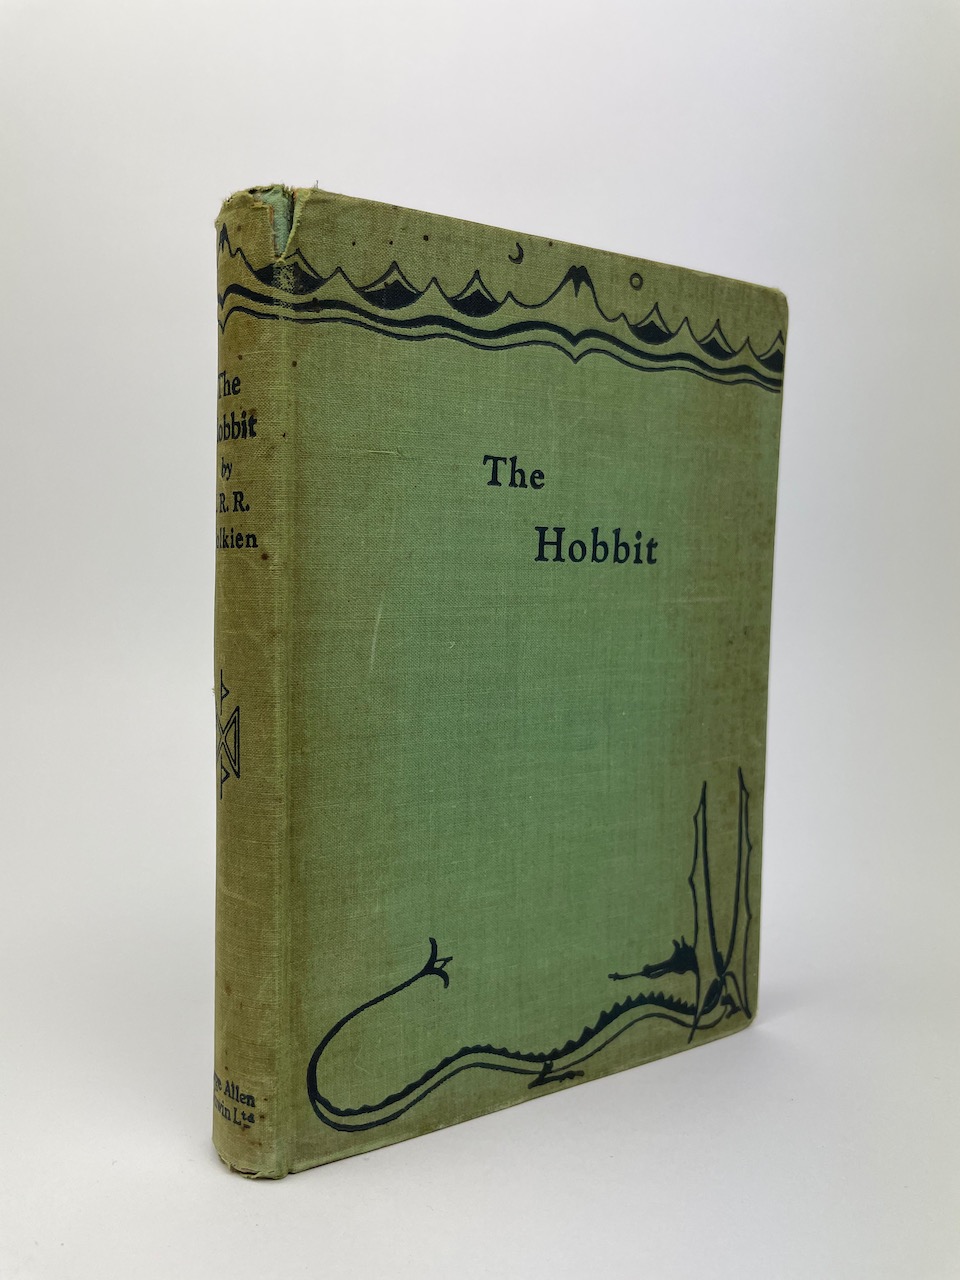 The Hobbit or There and Back Again. Published by Allen & Unwin, this second impression published 1937, same year as 1st impression.